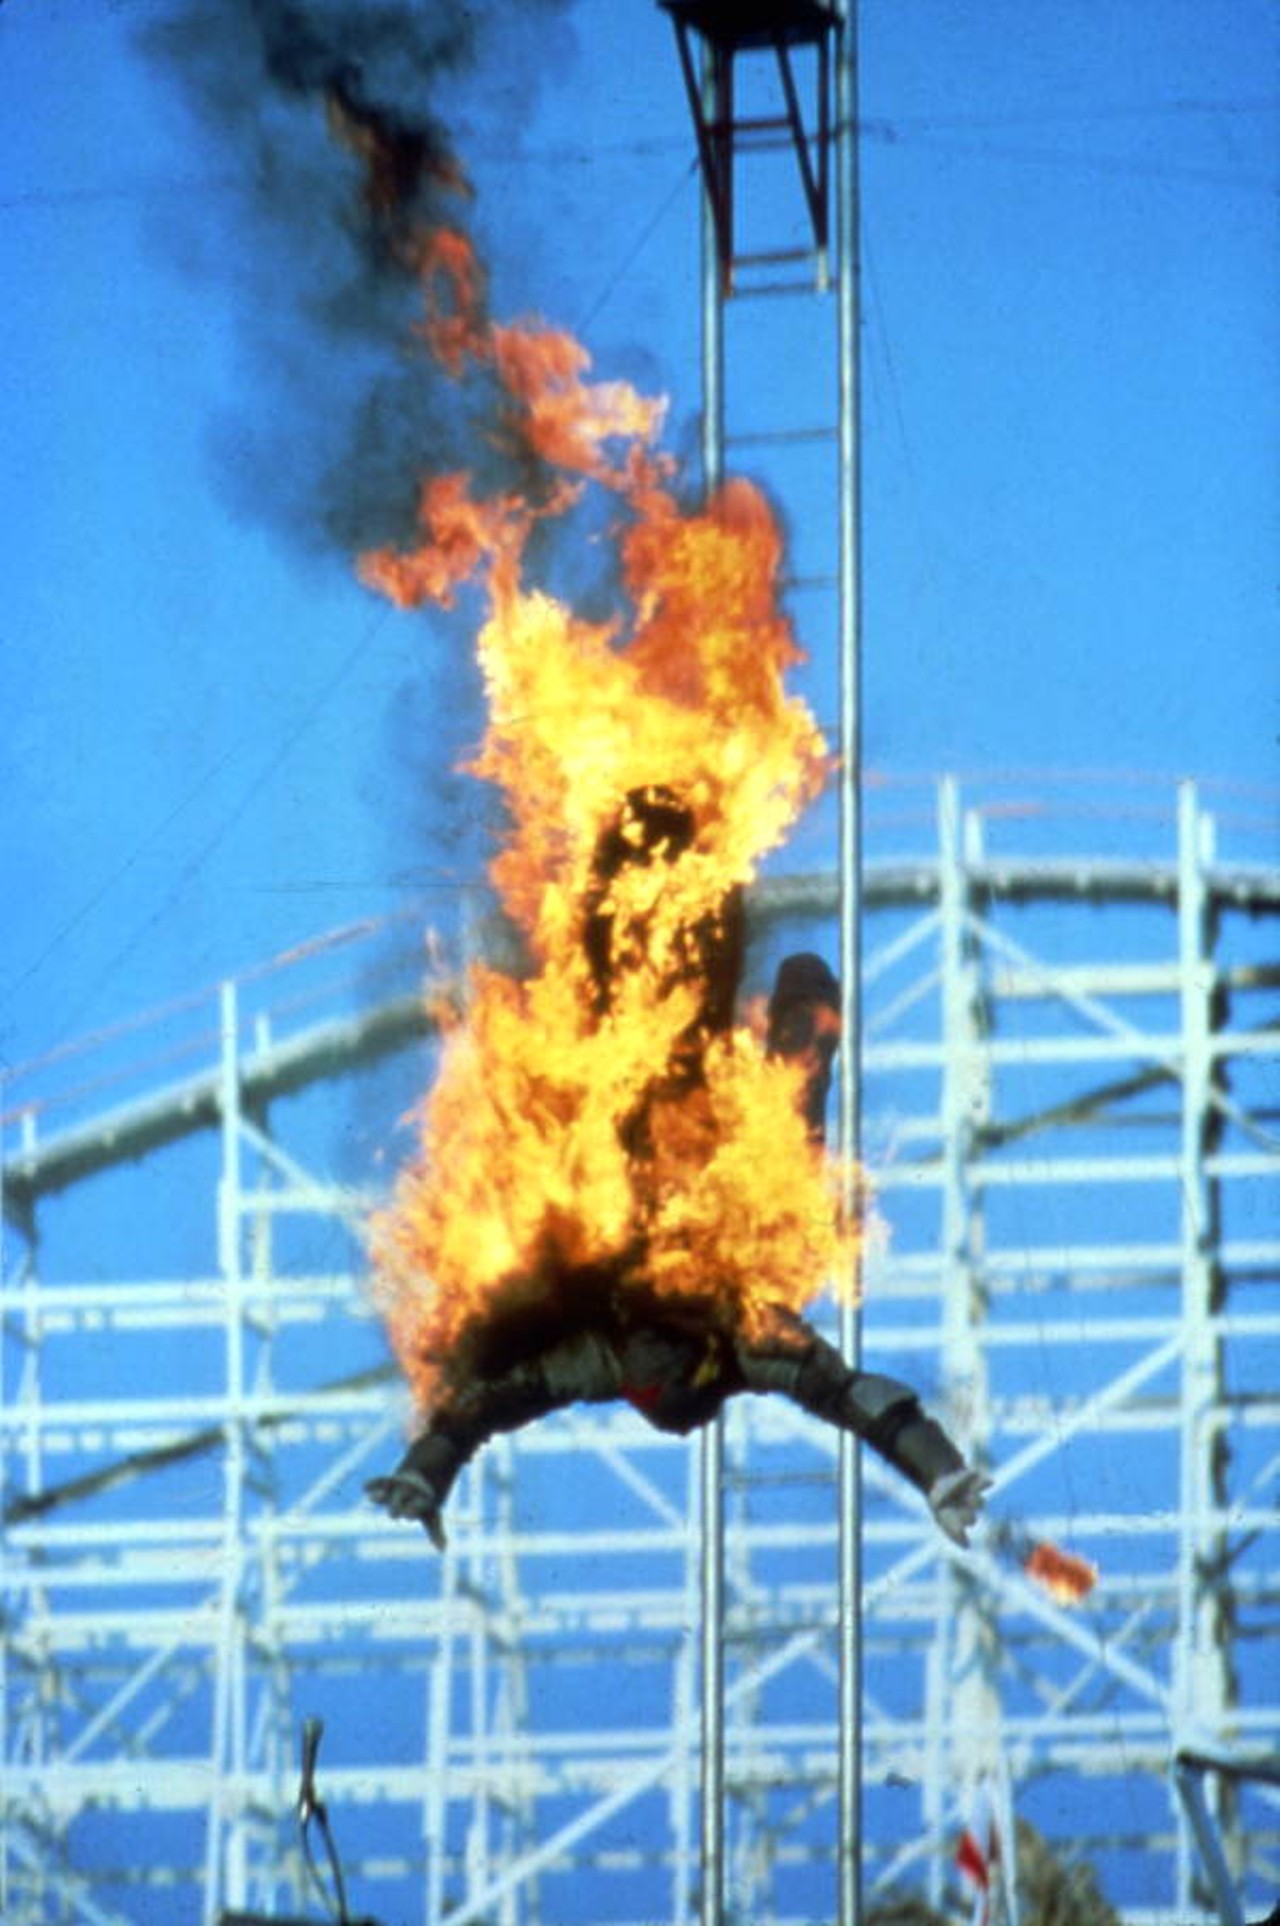 There was even a flaming high diver. (via floridamemory.com)